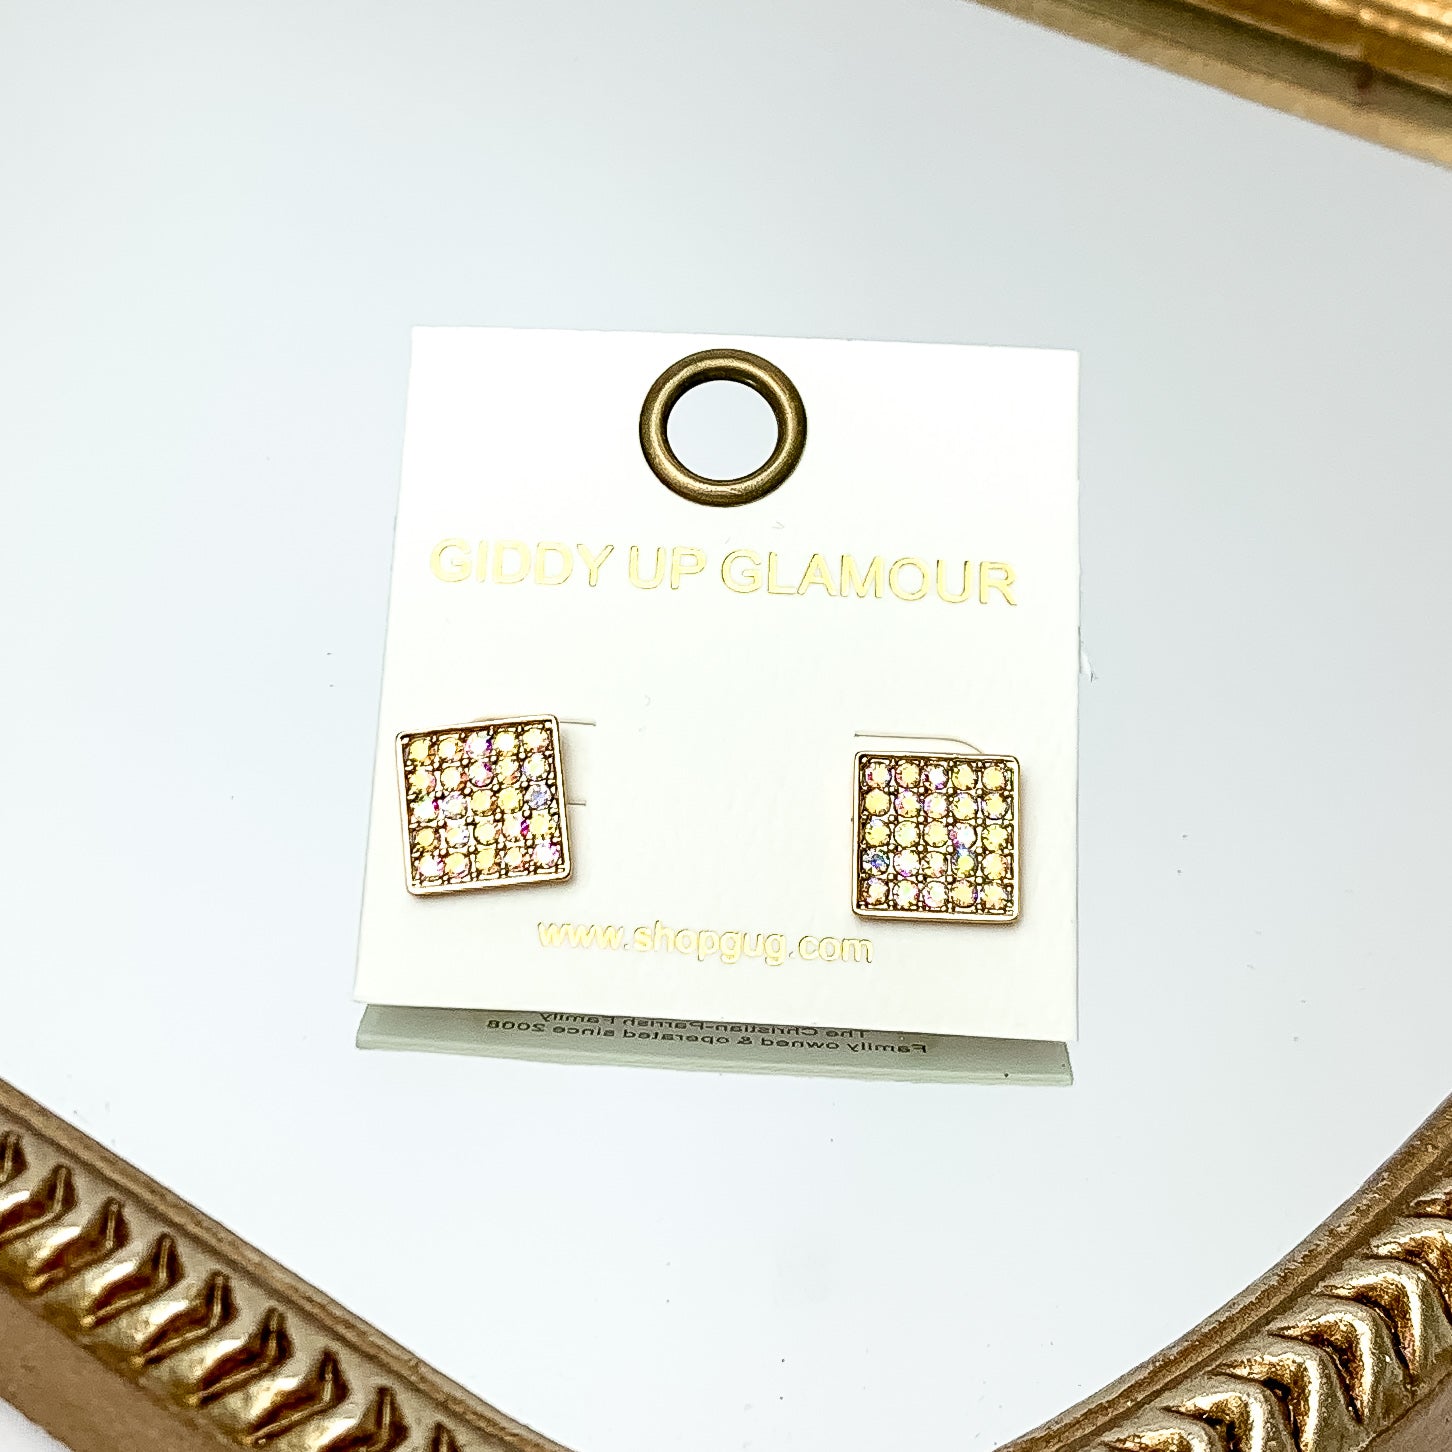 Square AB Crystal Stud Earrings in Gold Tone. These earrings are pictured on a white background with a gold frame around.